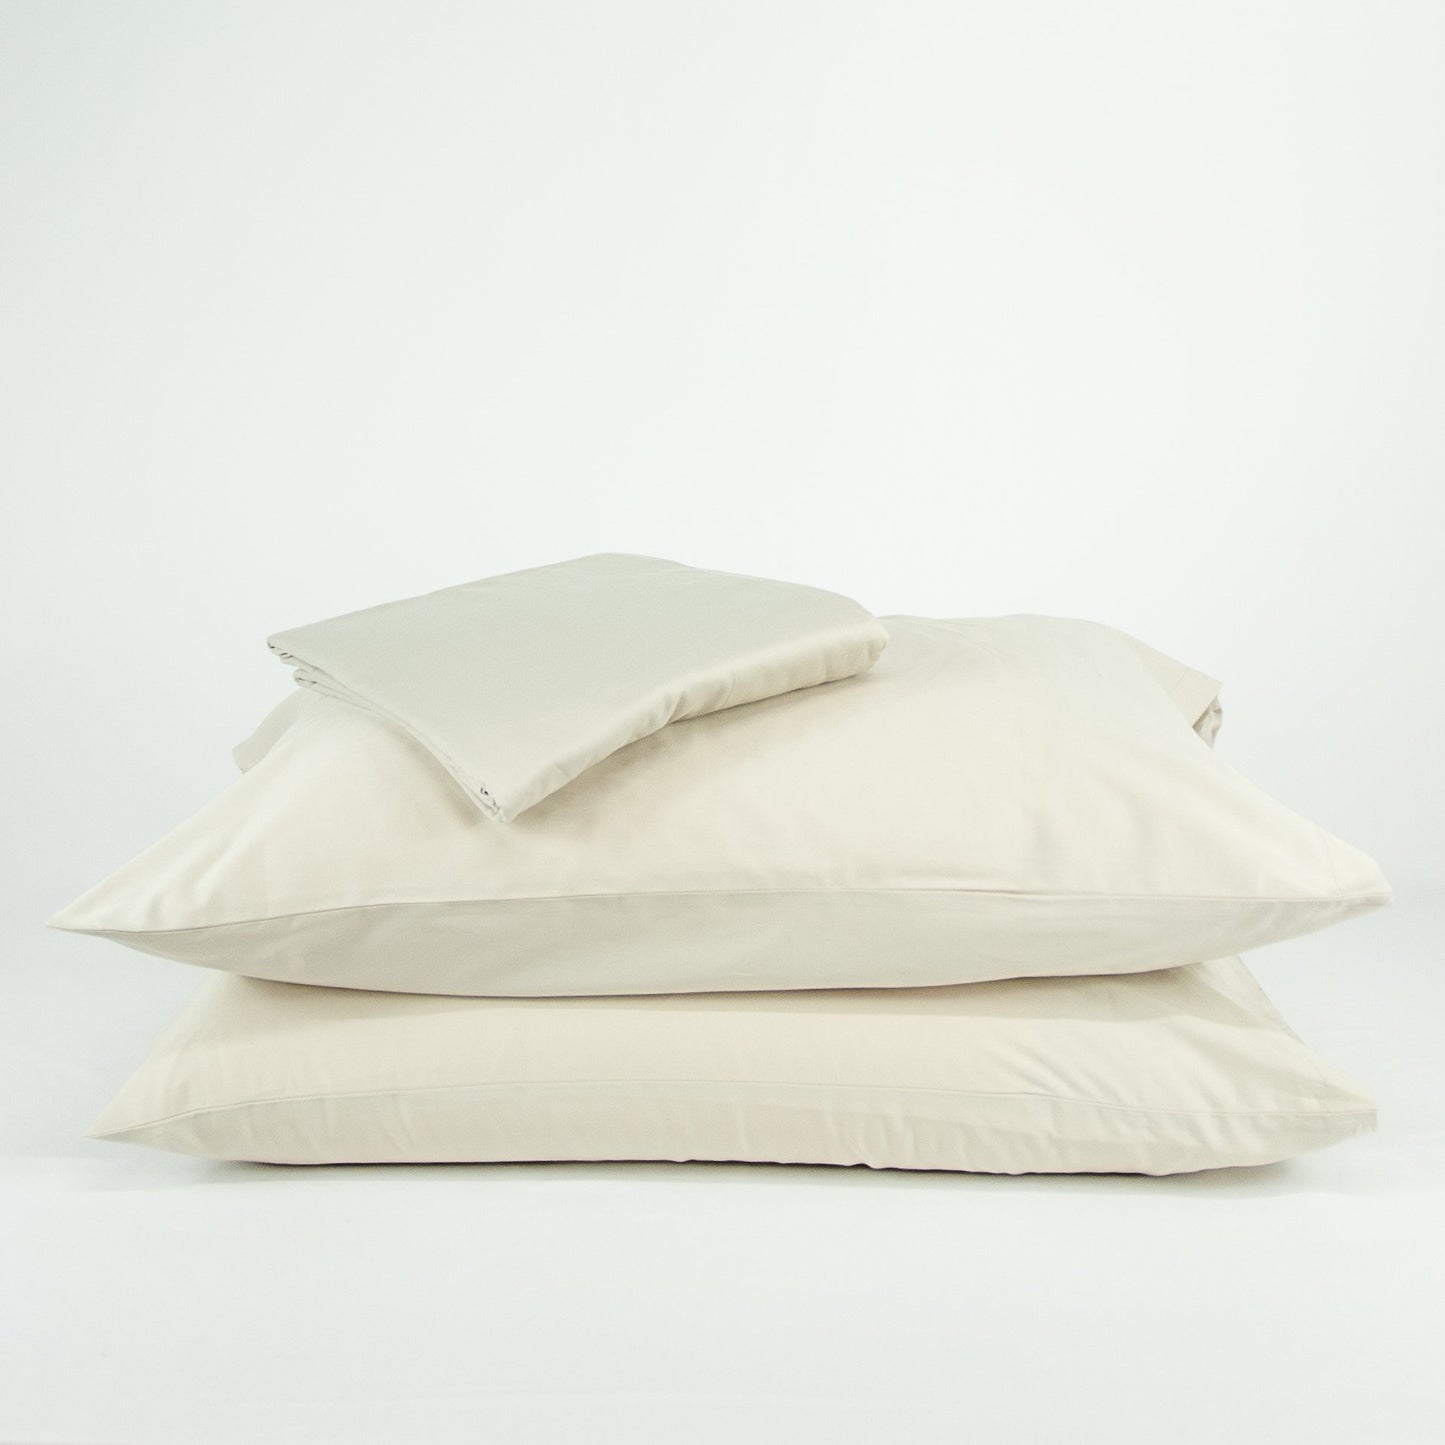 Stacked organic cotton pillowcases and sheets in egg shell white